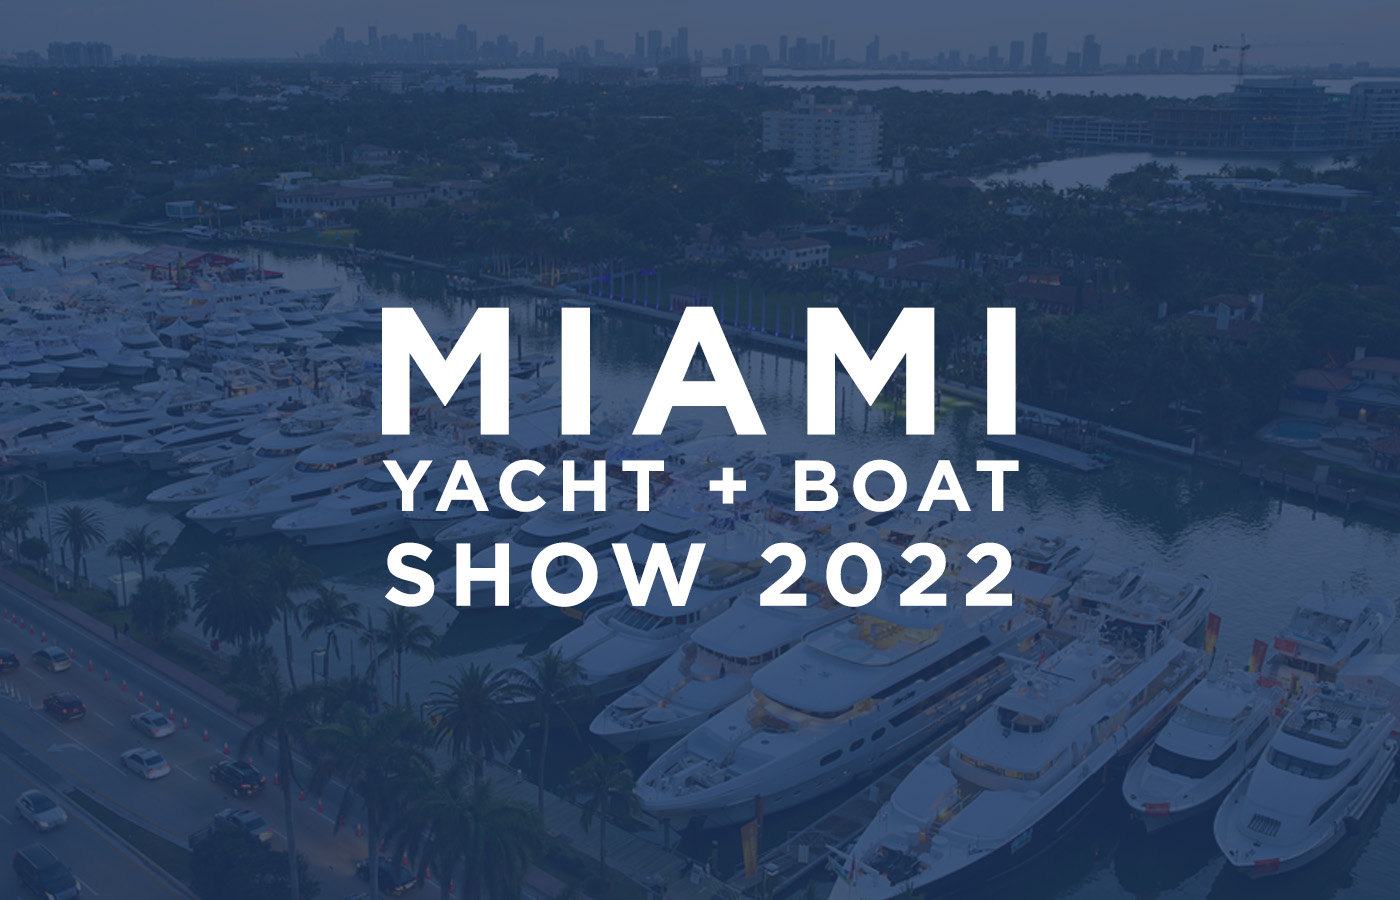 9 Exciting Yachts Debuting at the Miami International Boat Show [In The News]